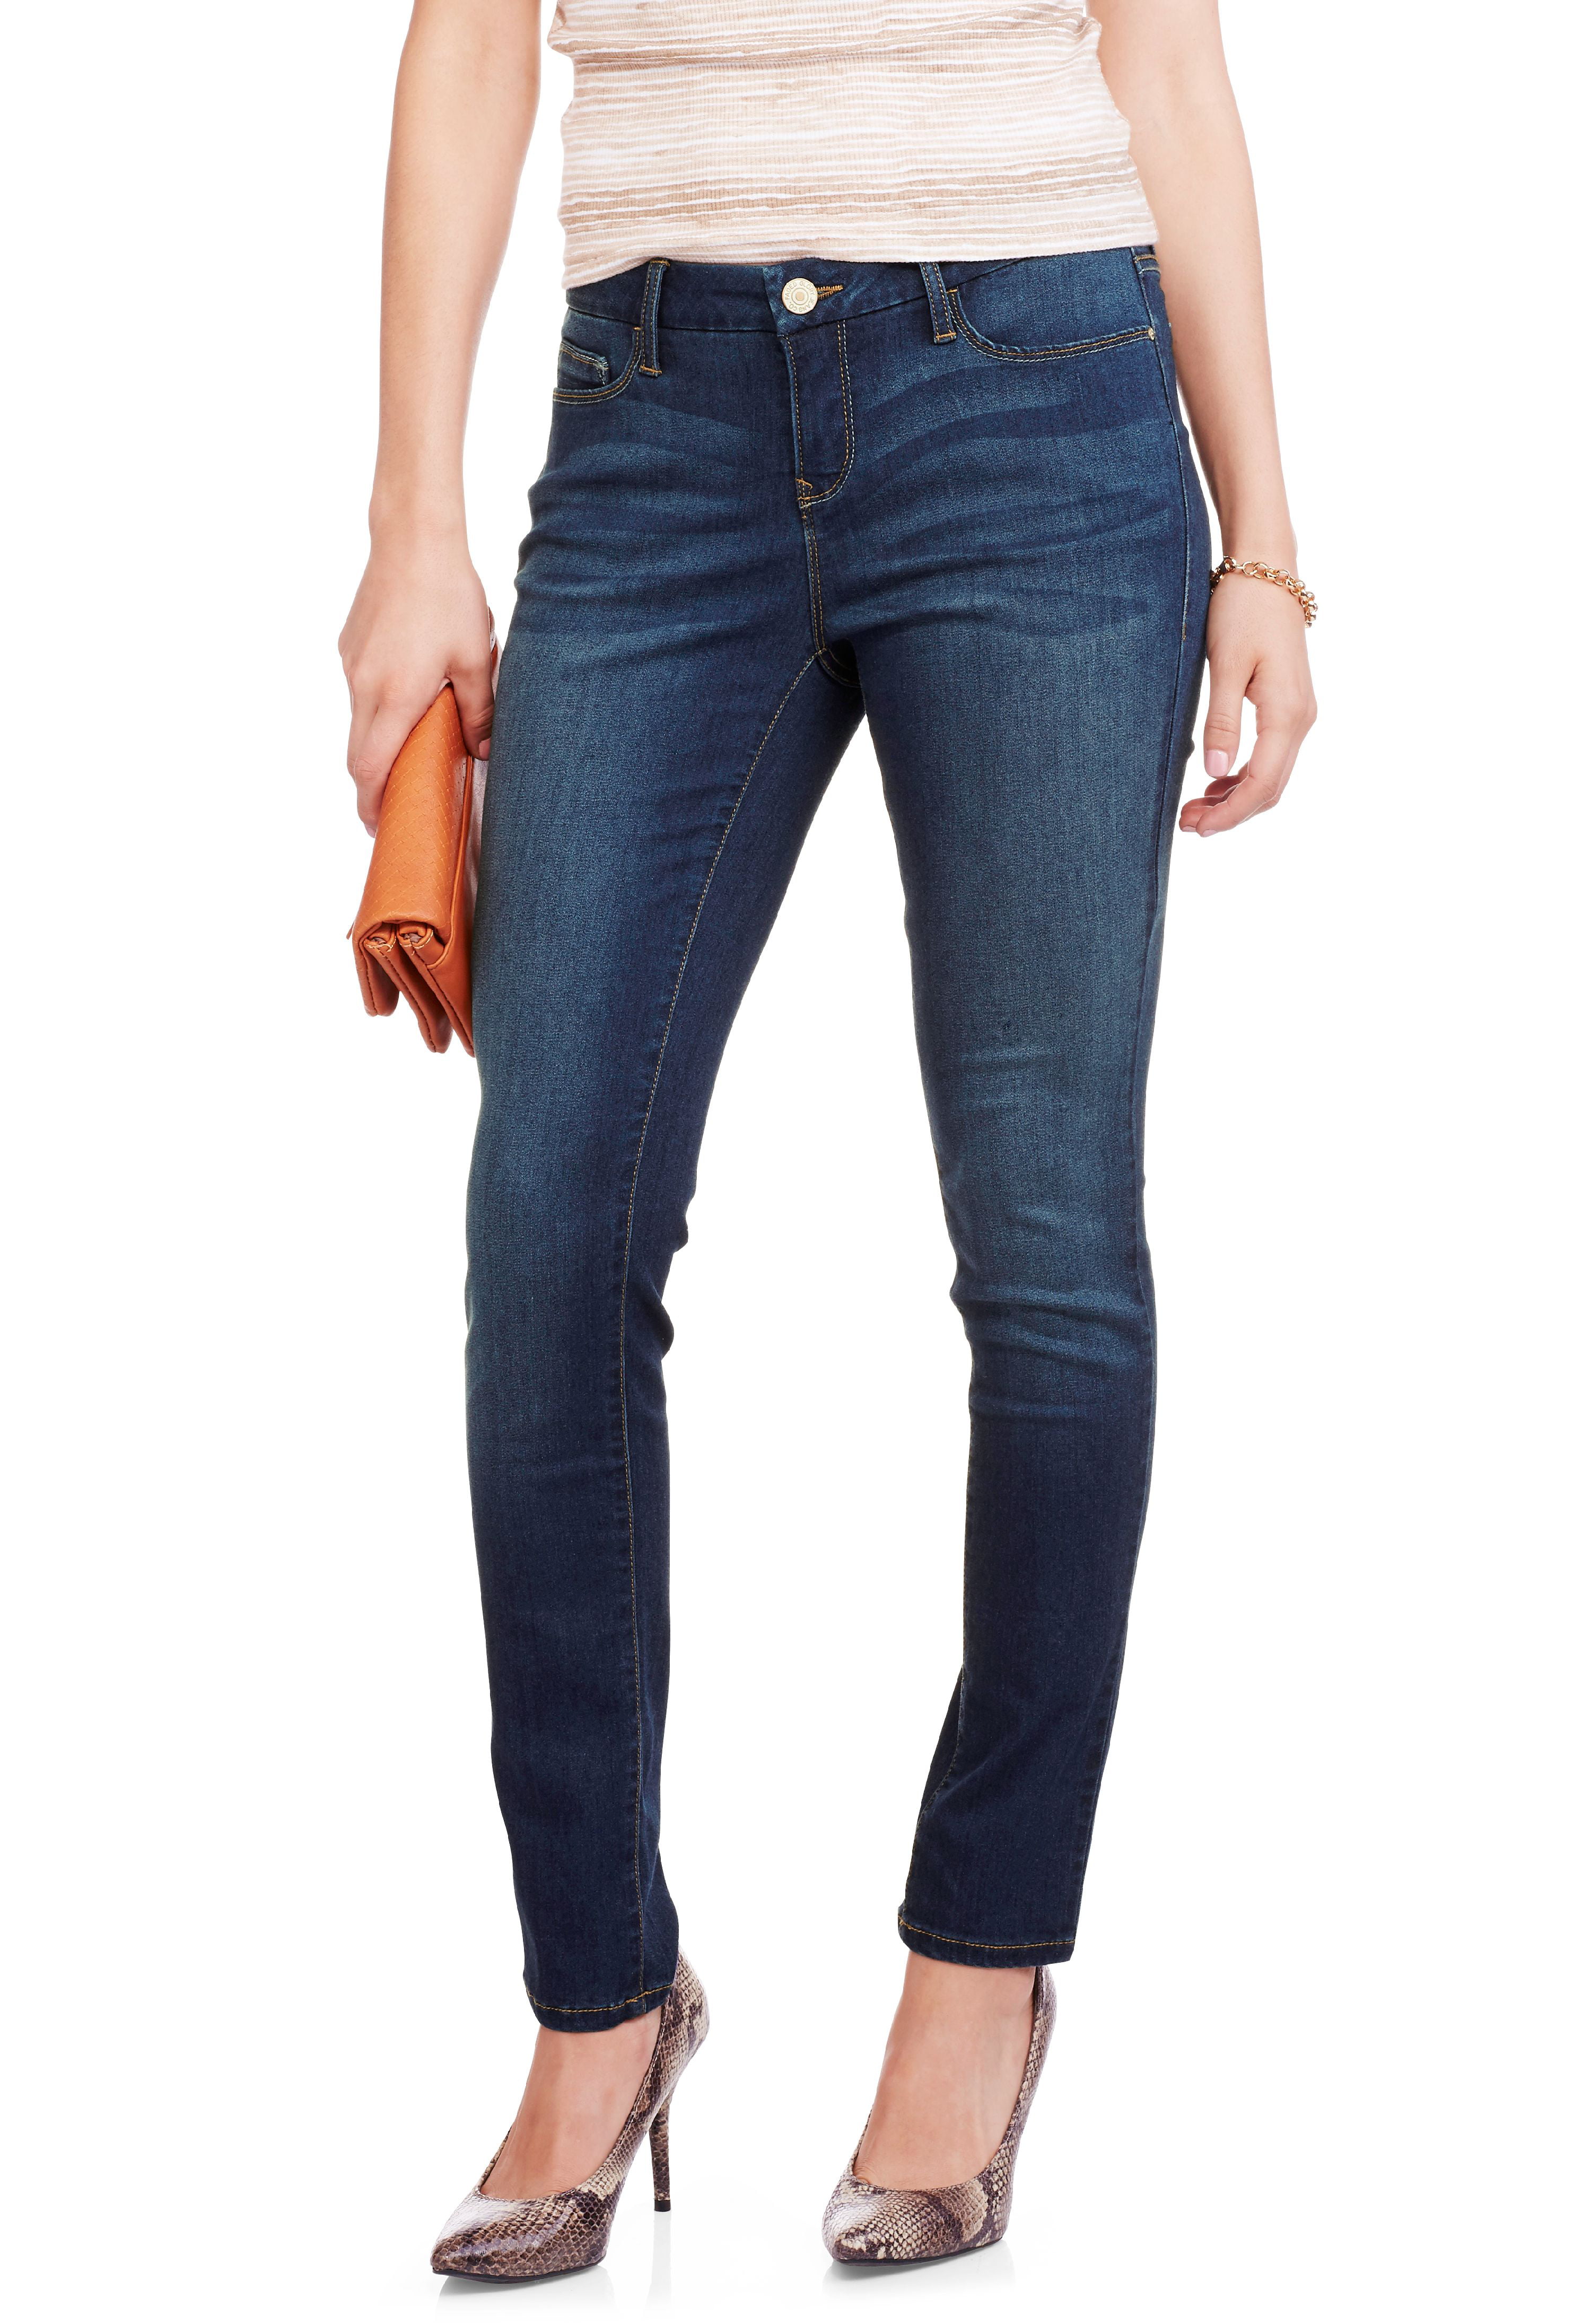 Women's Mid Rise Skinny Jeans with Super Stretch - Walmart.com